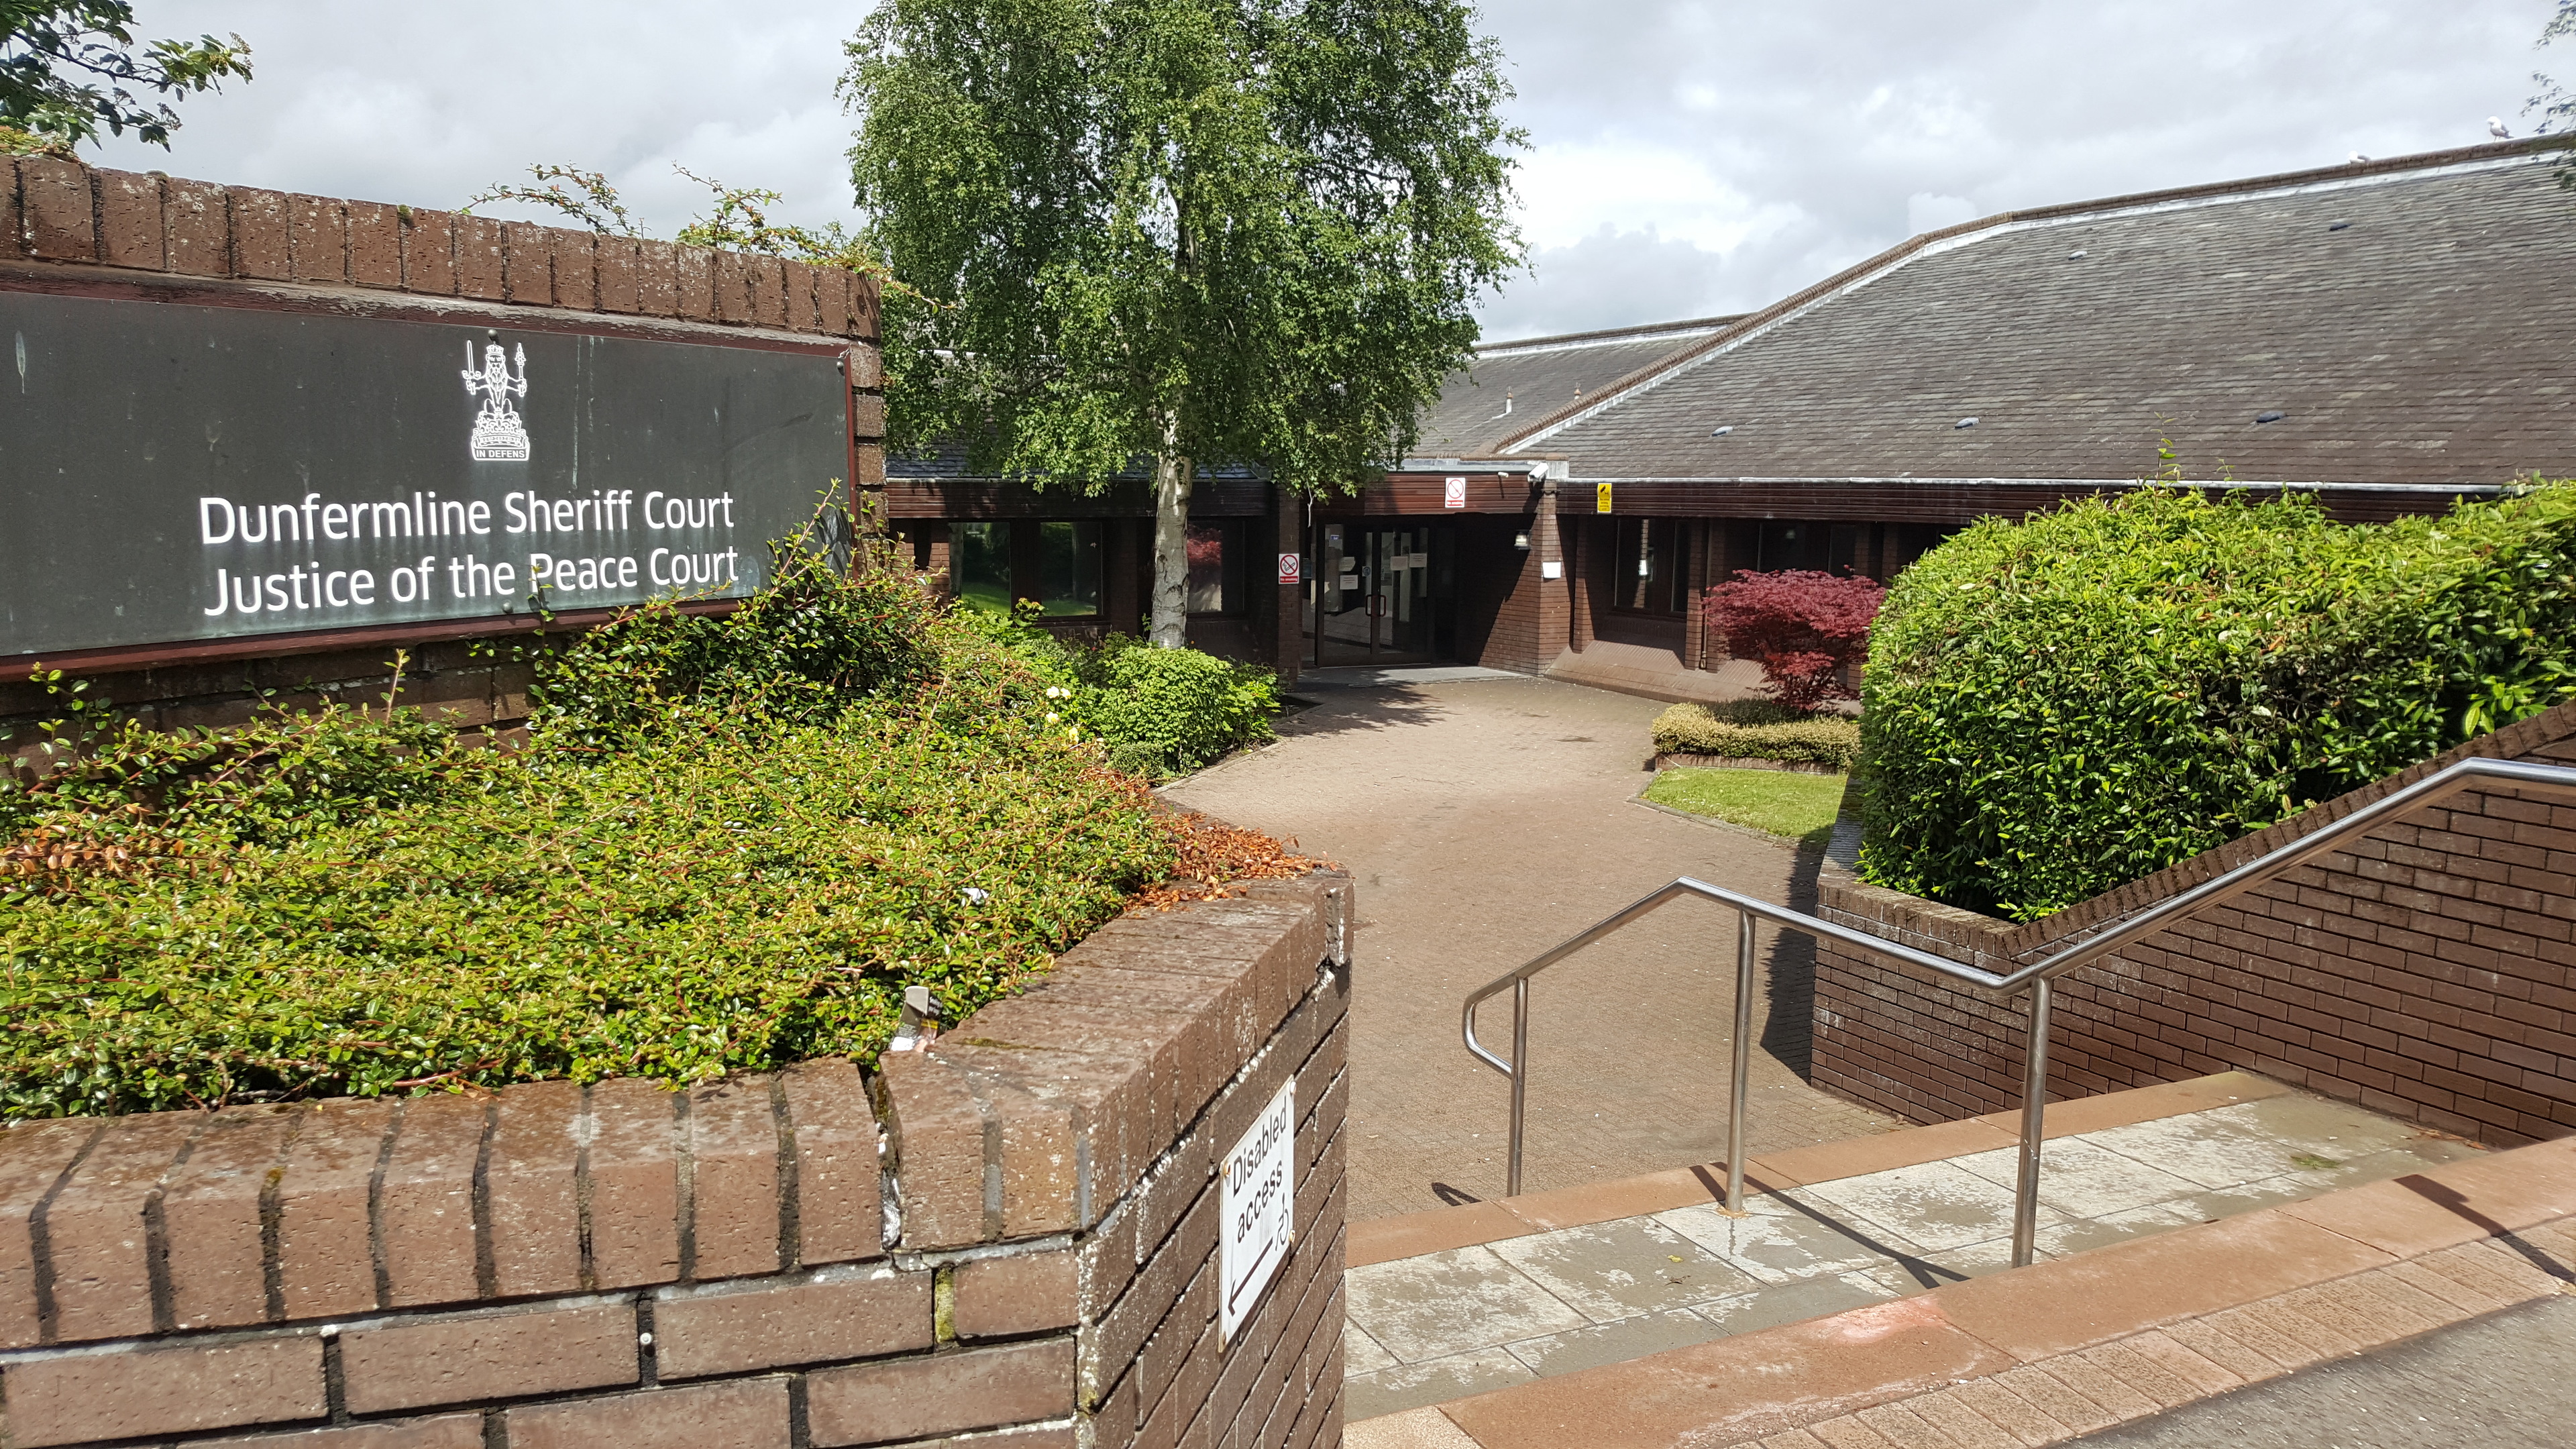 Dunfermline Sheriff Court has seen 104 emergencies in the past three years.